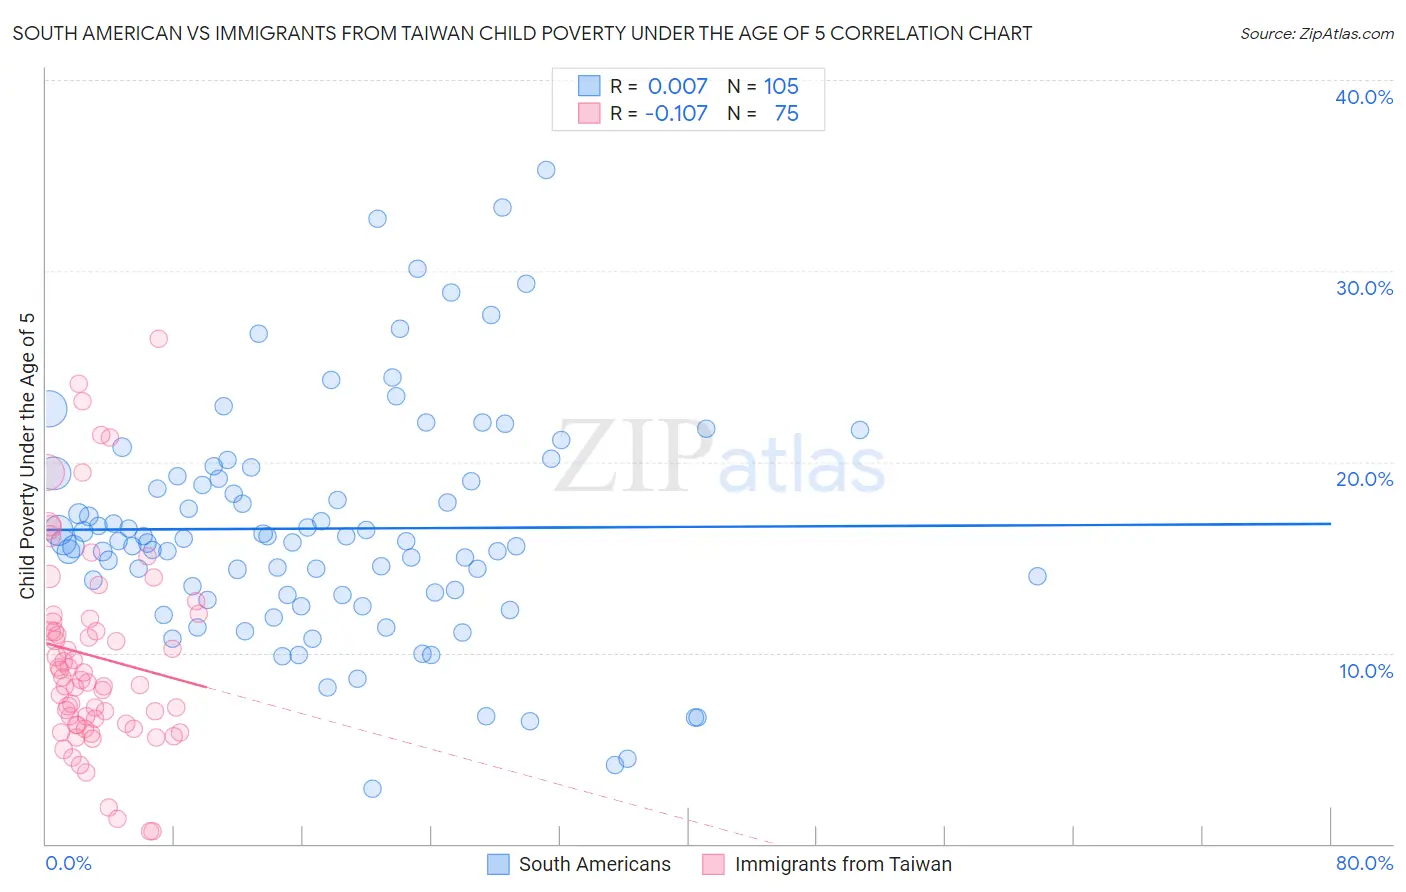 South American vs Immigrants from Taiwan Child Poverty Under the Age of 5